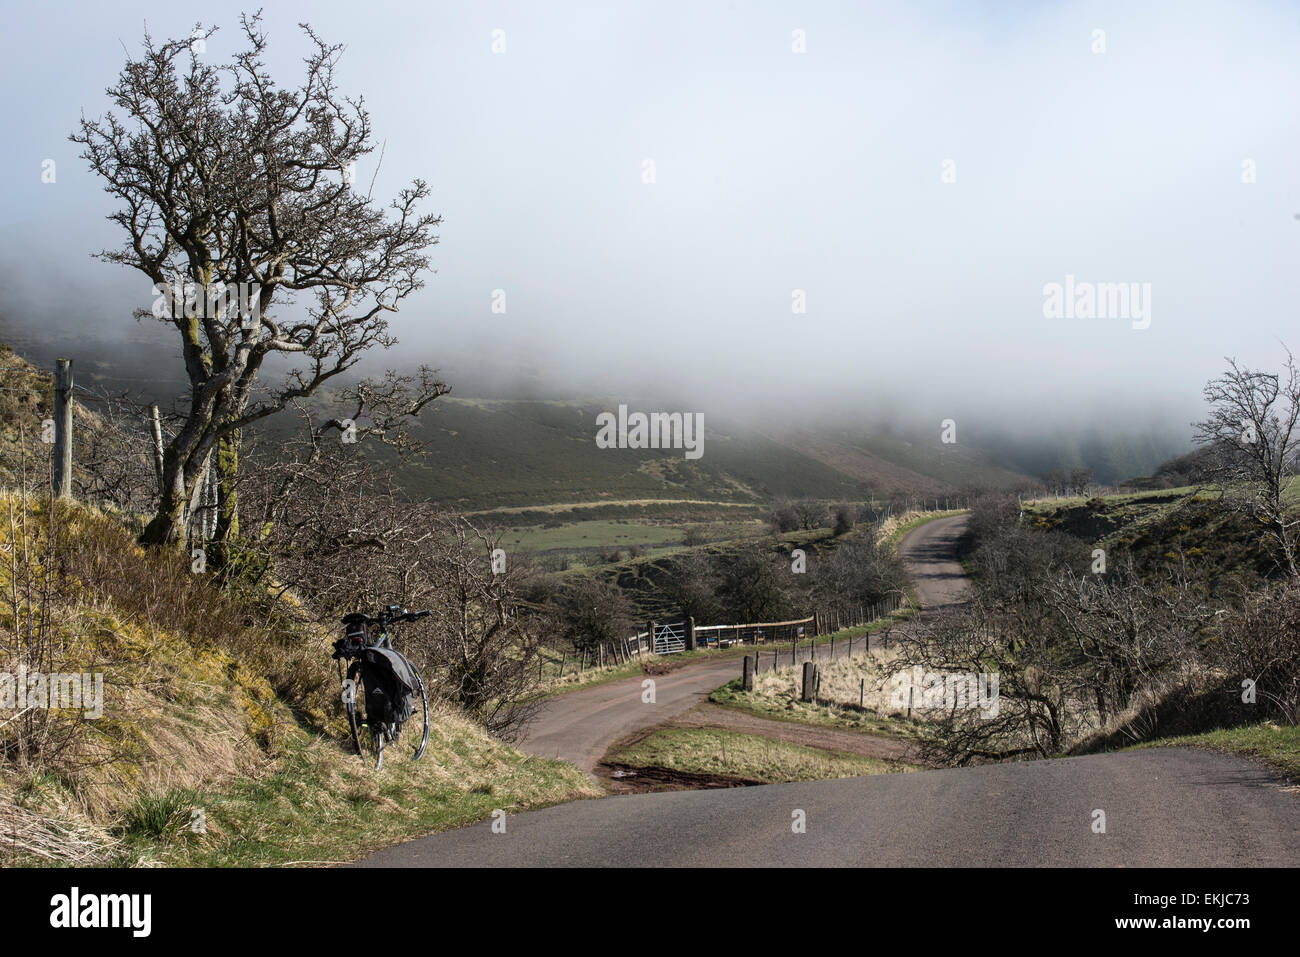 Twisty narrow road disappearing in the mist at Croasdale, Cumbria with a bicycle in the foreground. Small tree Stock Photo